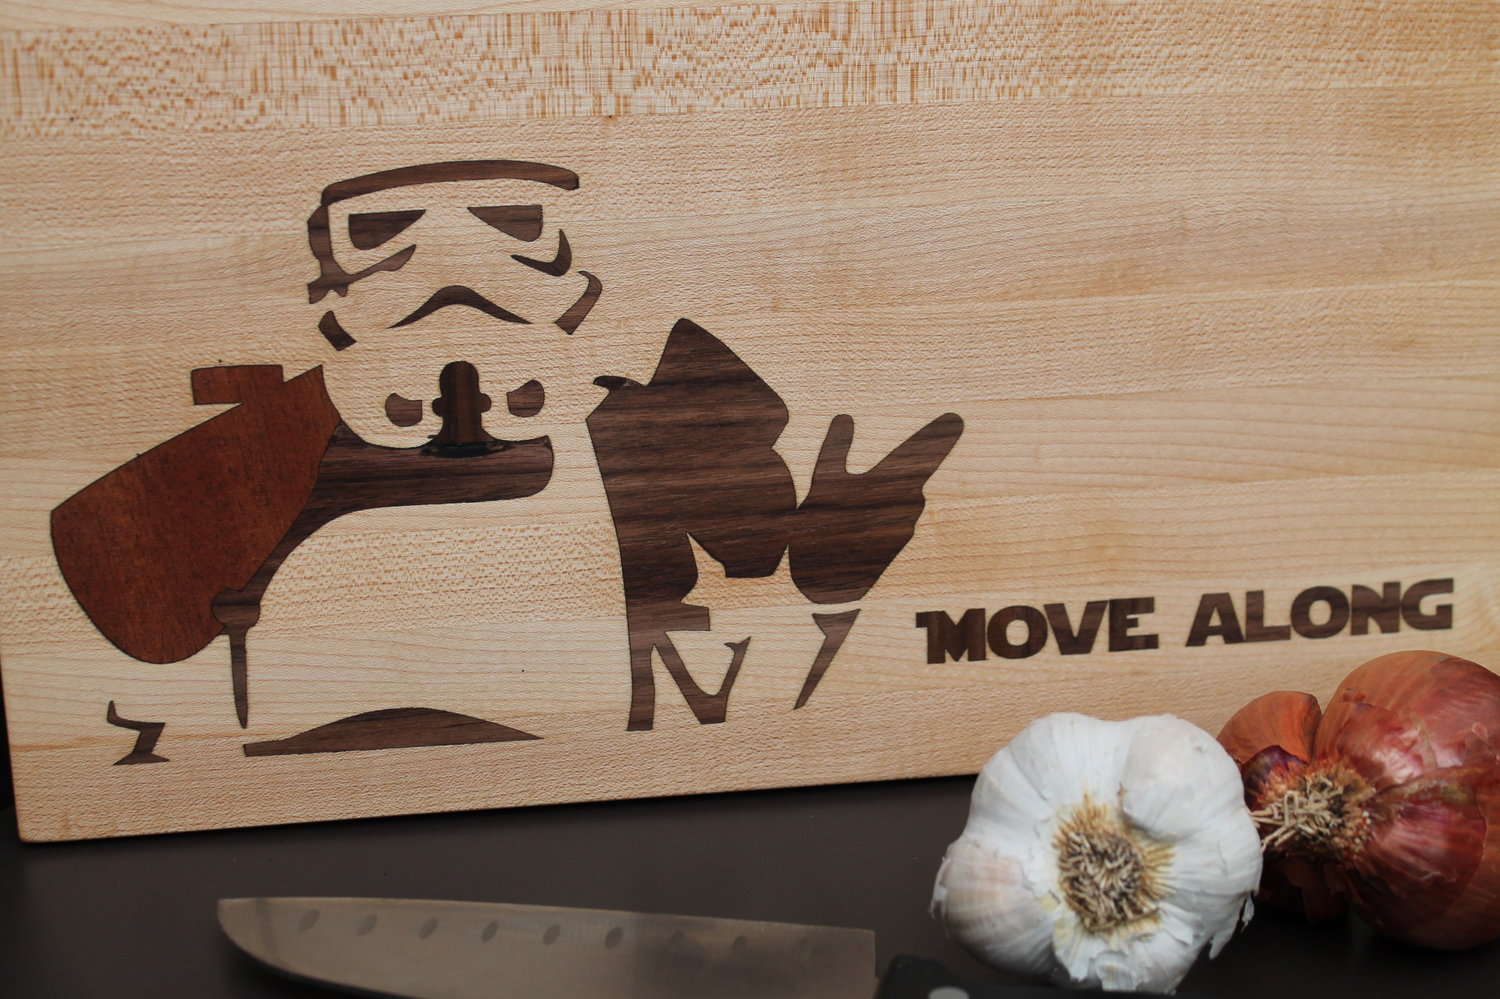 These Aren't the Droids We're Cooking For Cutting Board — Oliverstuff -  Home Decor and Kitchen Goods